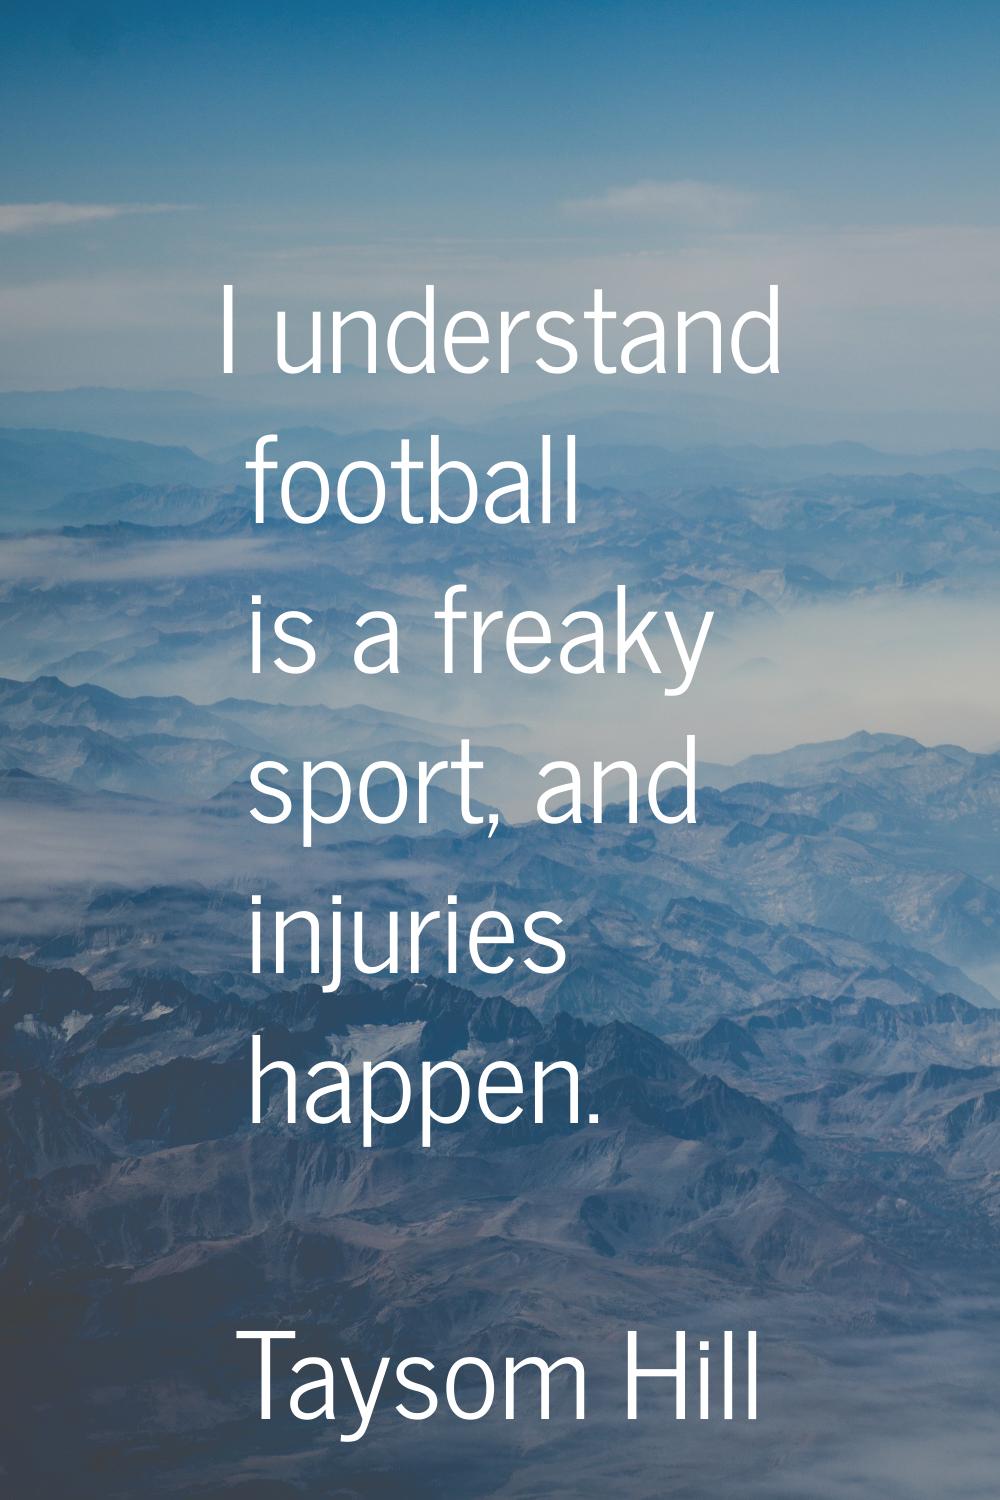 I understand football is a freaky sport, and injuries happen.